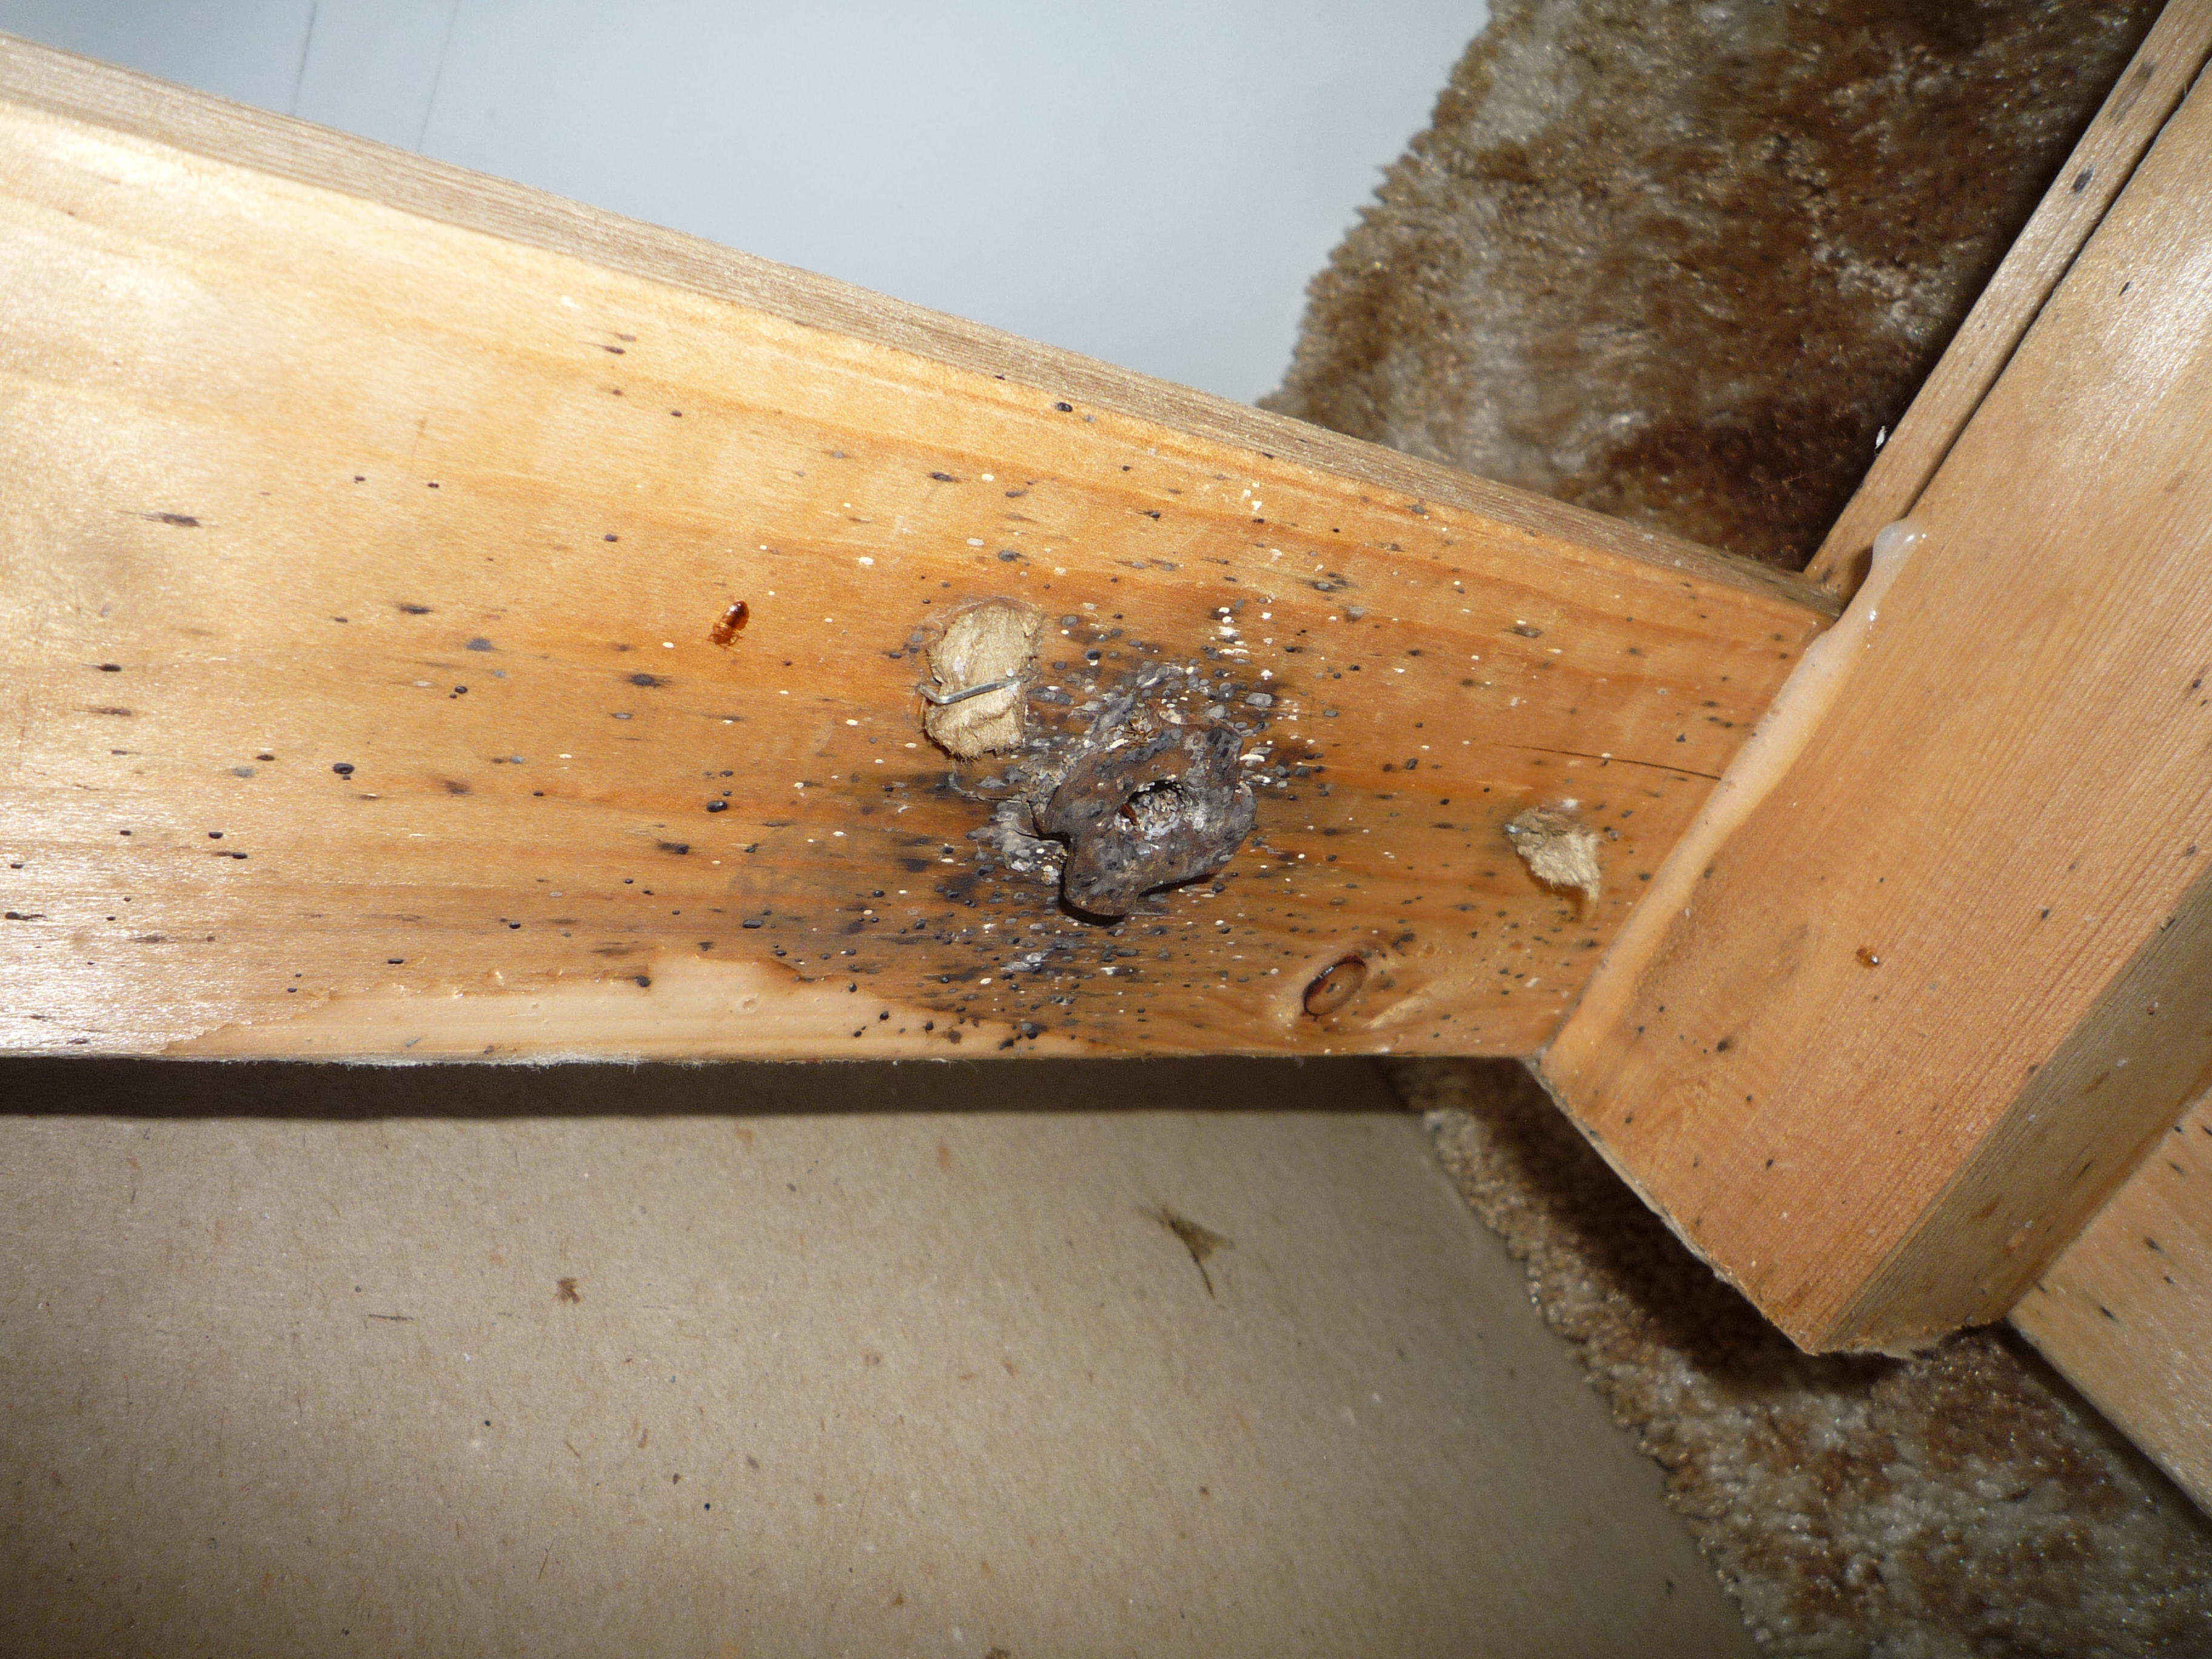 Gallery Images of Bed Bug Causes